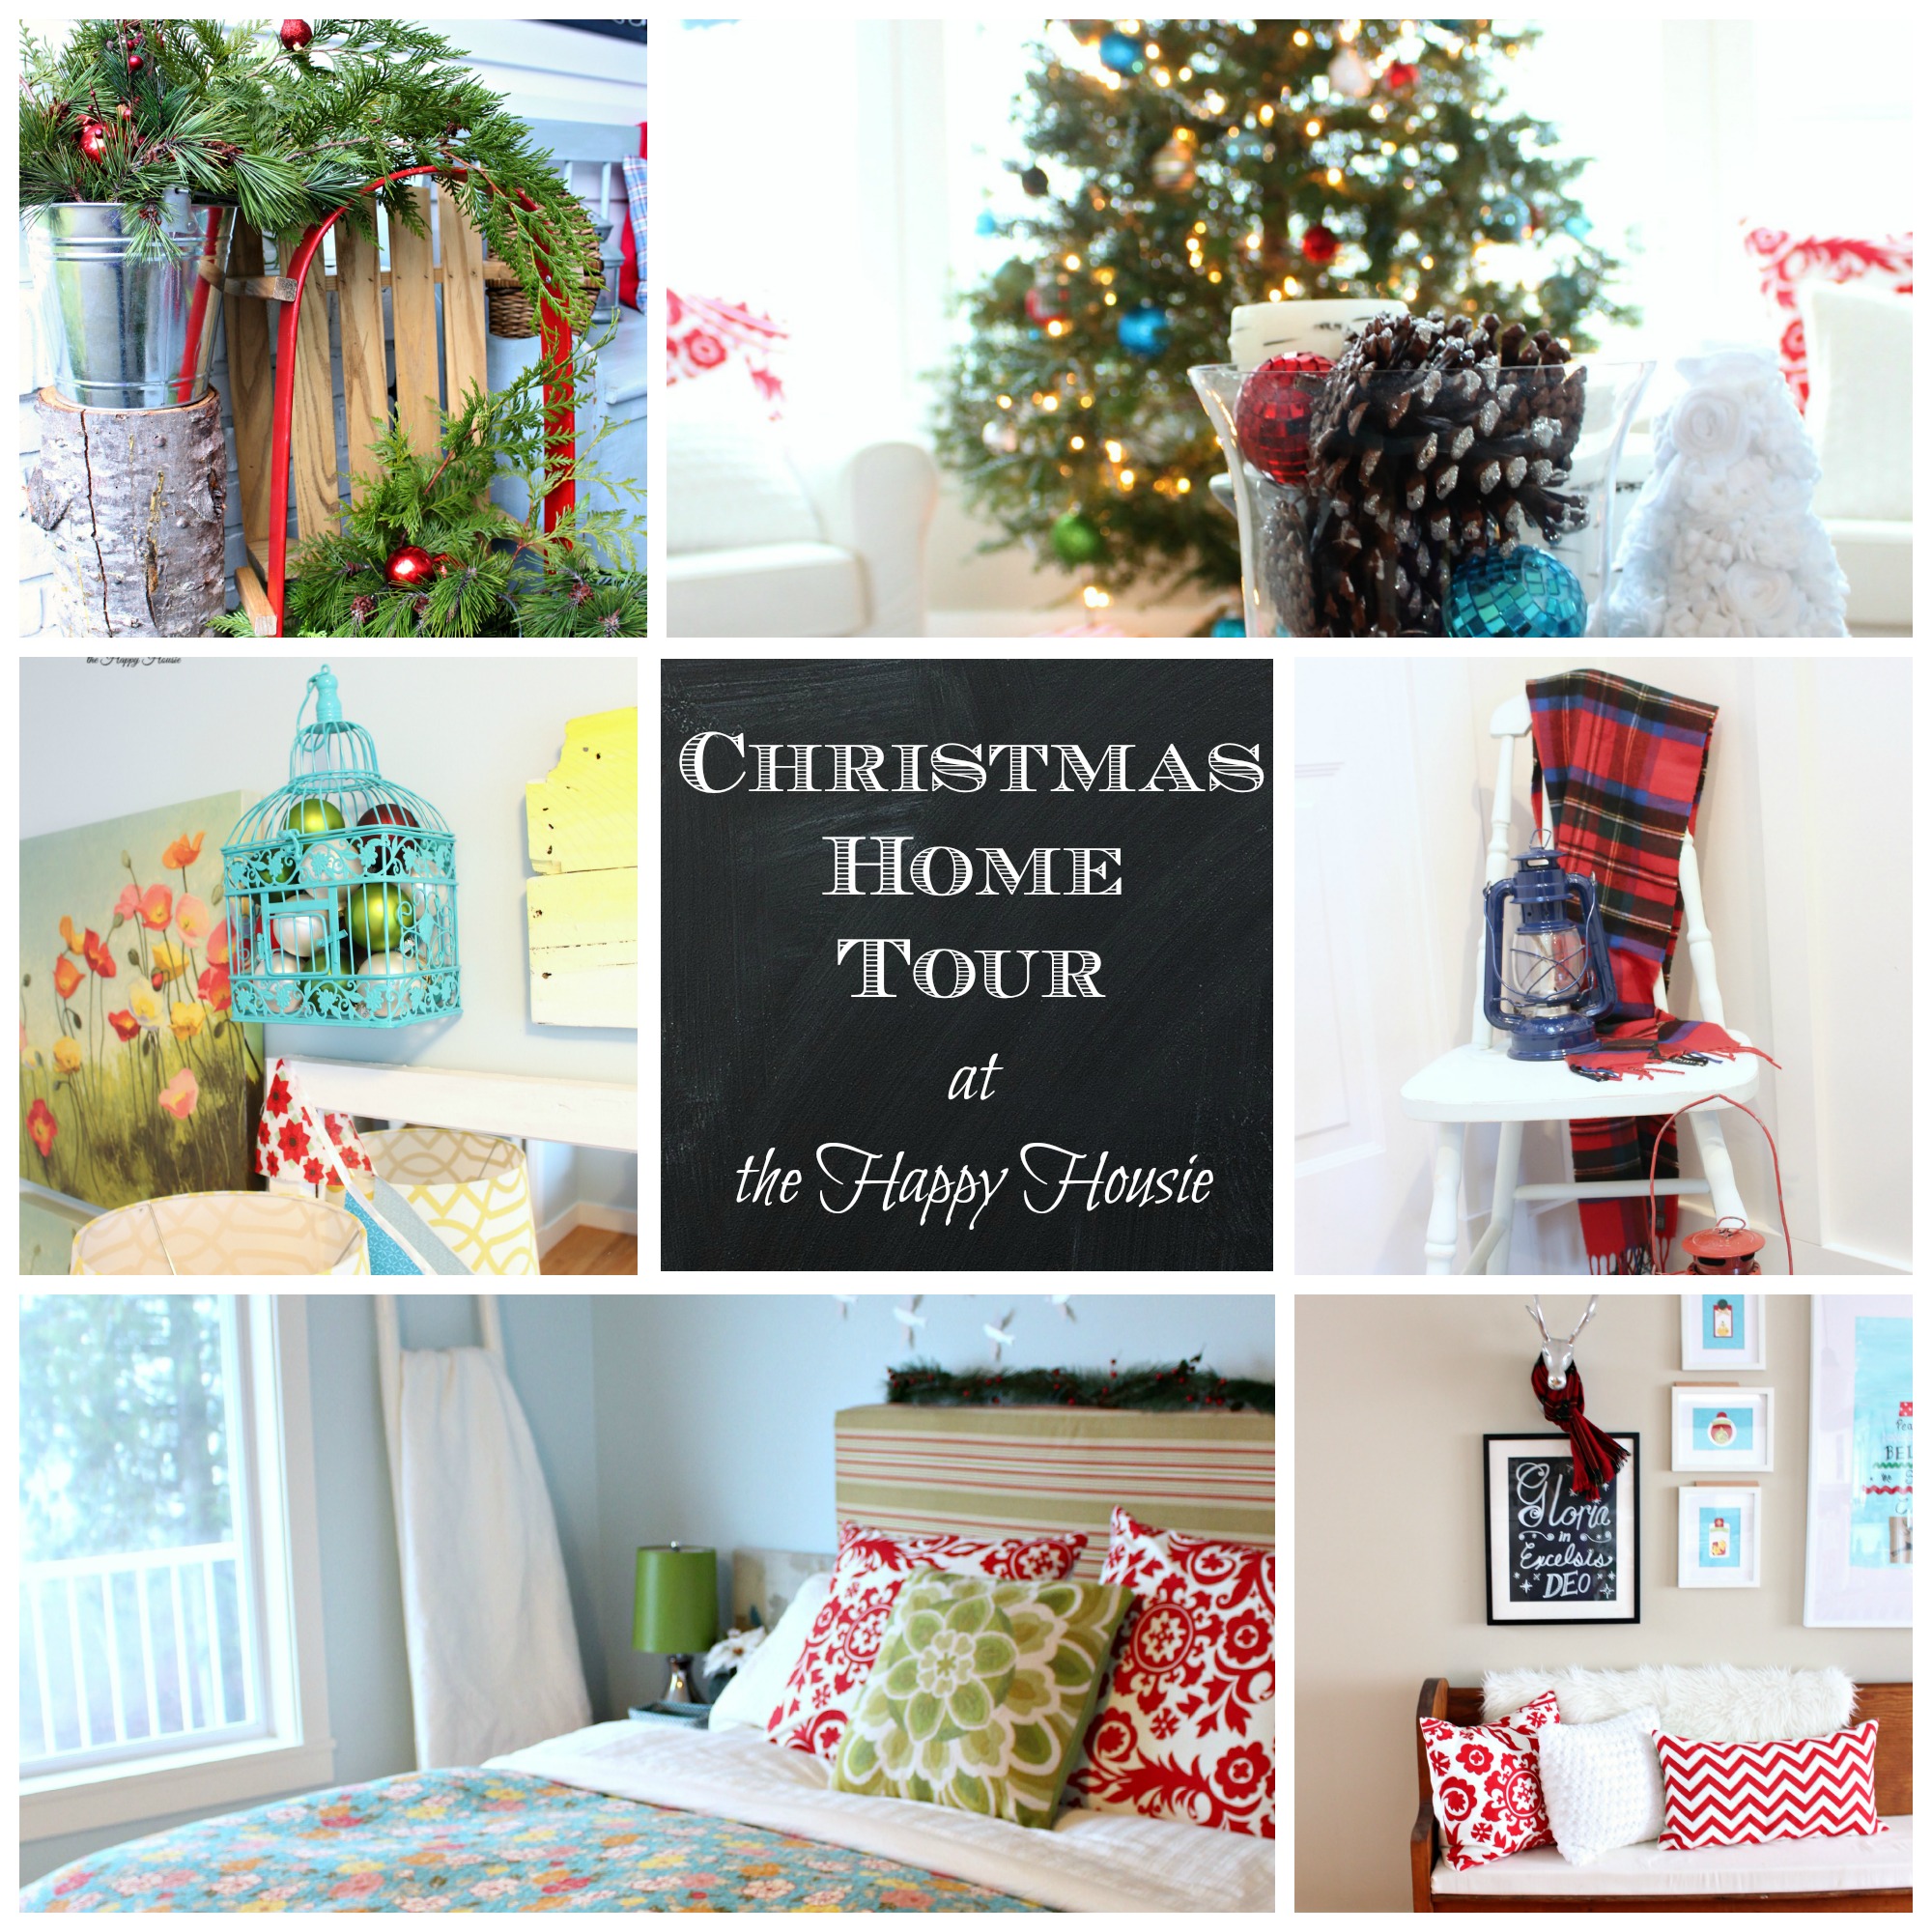 Deck the Halls: Our Full Christmas Home Tour